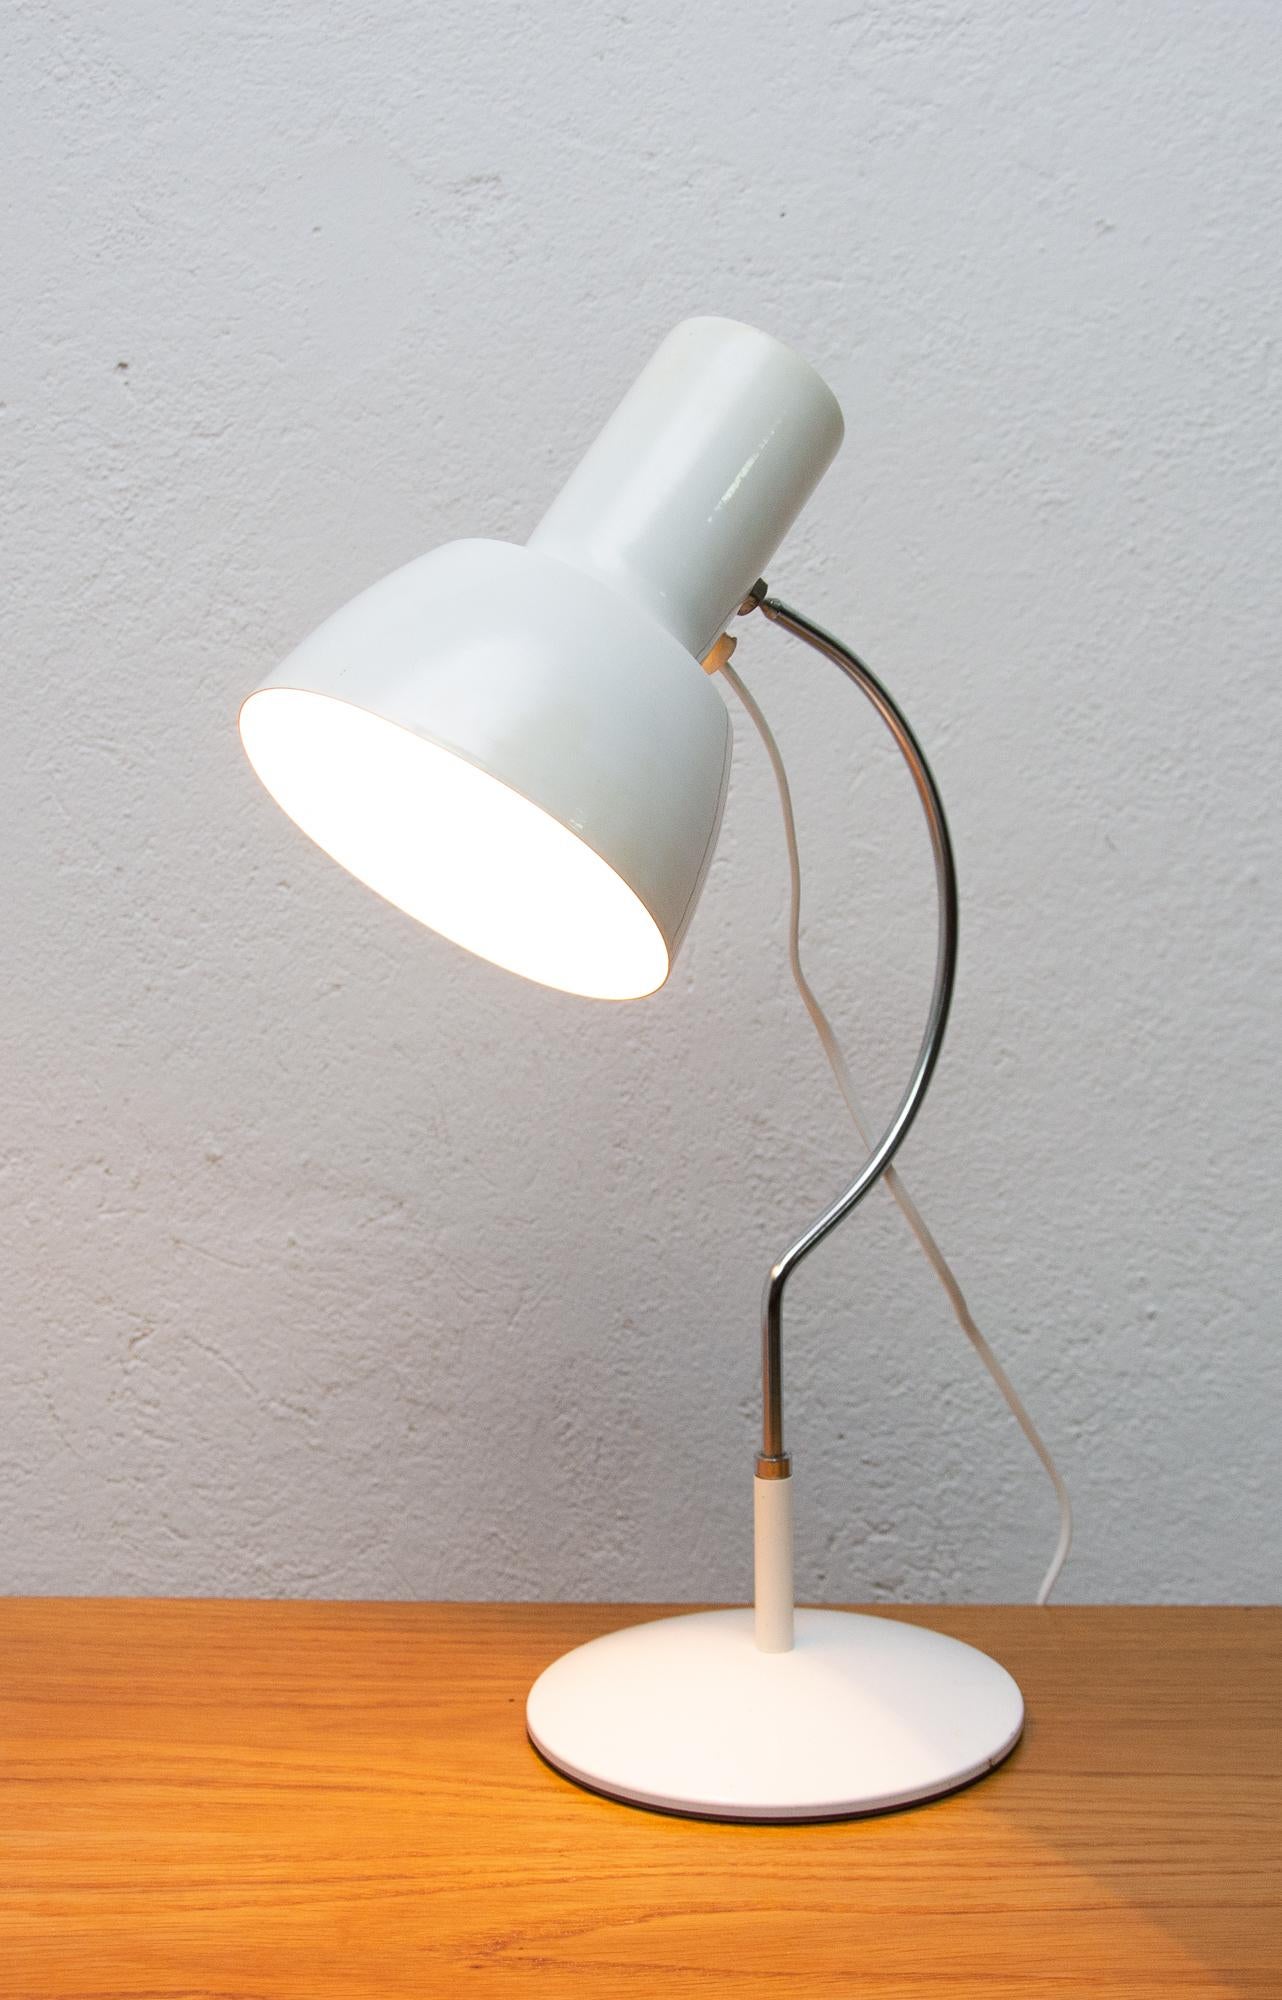 This midcentury table lamp was designed by Josef Hurka for Napako. It features a chrome arched construction to which a gray cone-shaped shade is attached. Other material: Aluminum, plastic. Fully functional, newly wired, the lamp is in very good